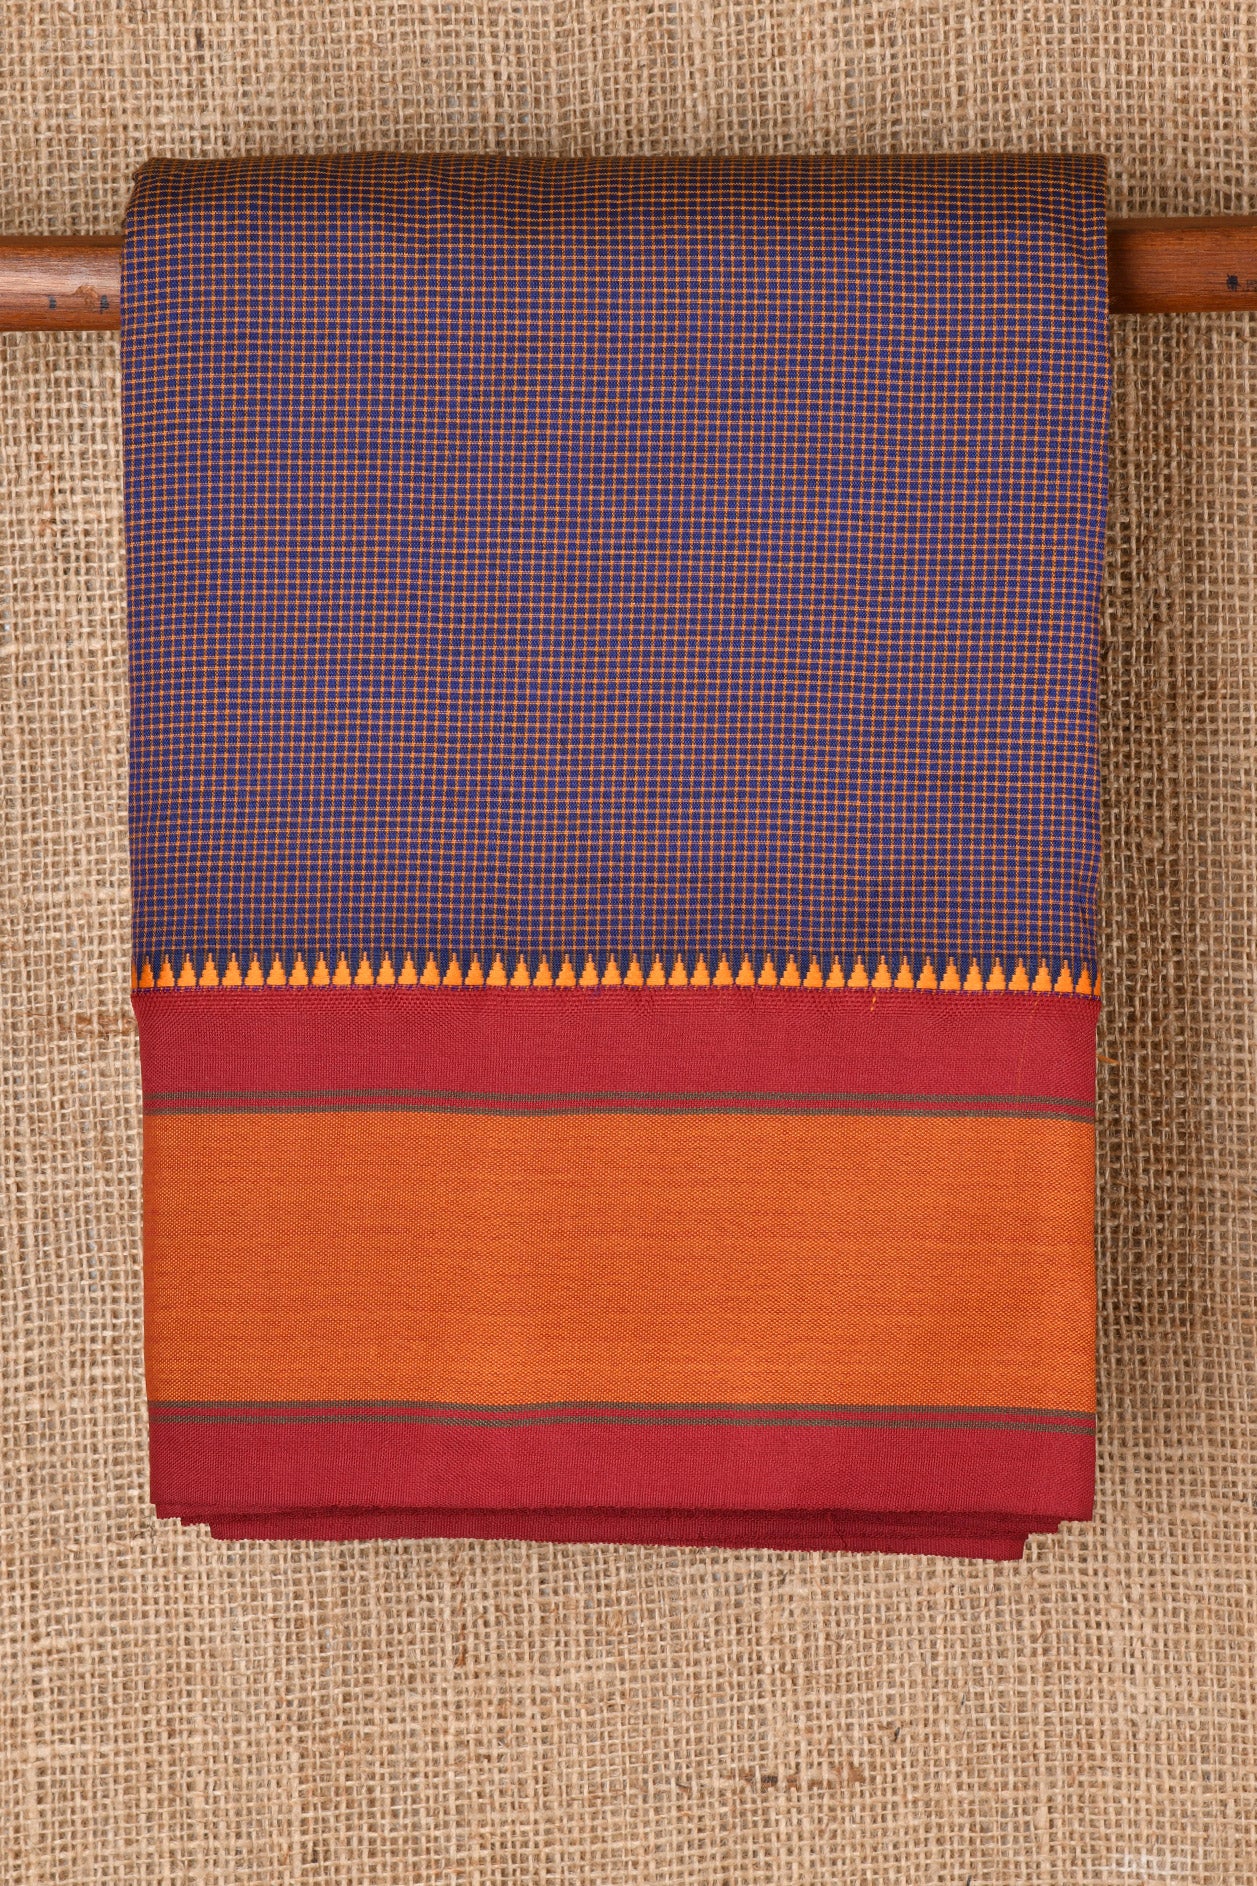 Temple Border With Checked Blue Dharwad Cotton Saree